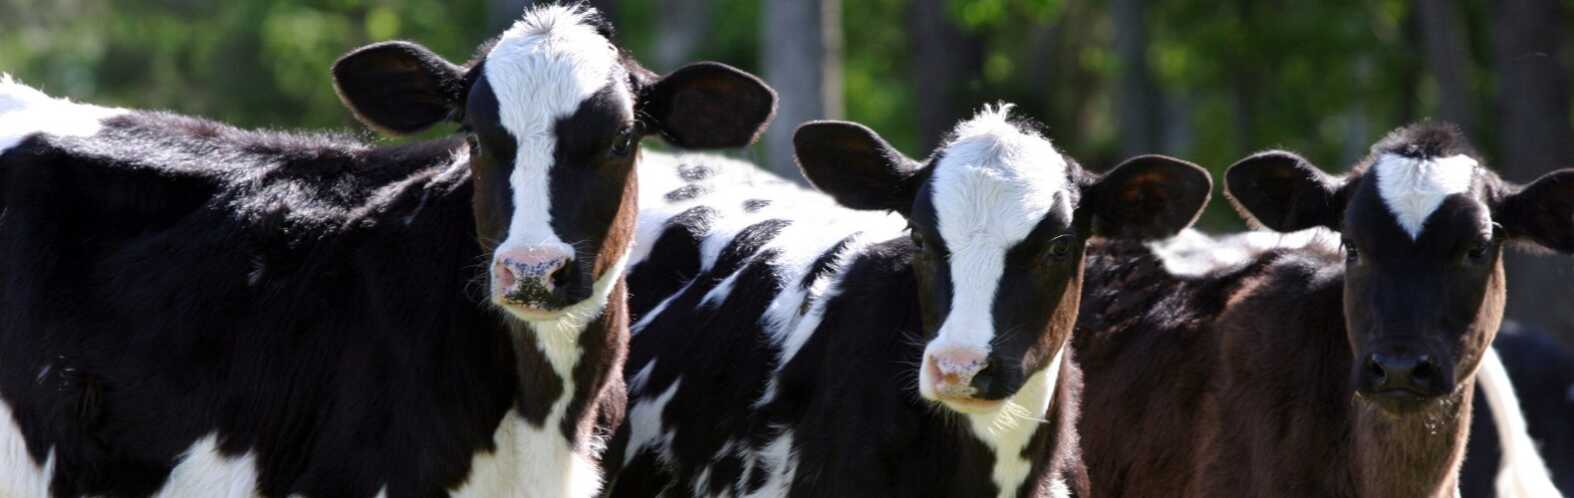 Insurance Coverages to Protect Your Dairy Farm